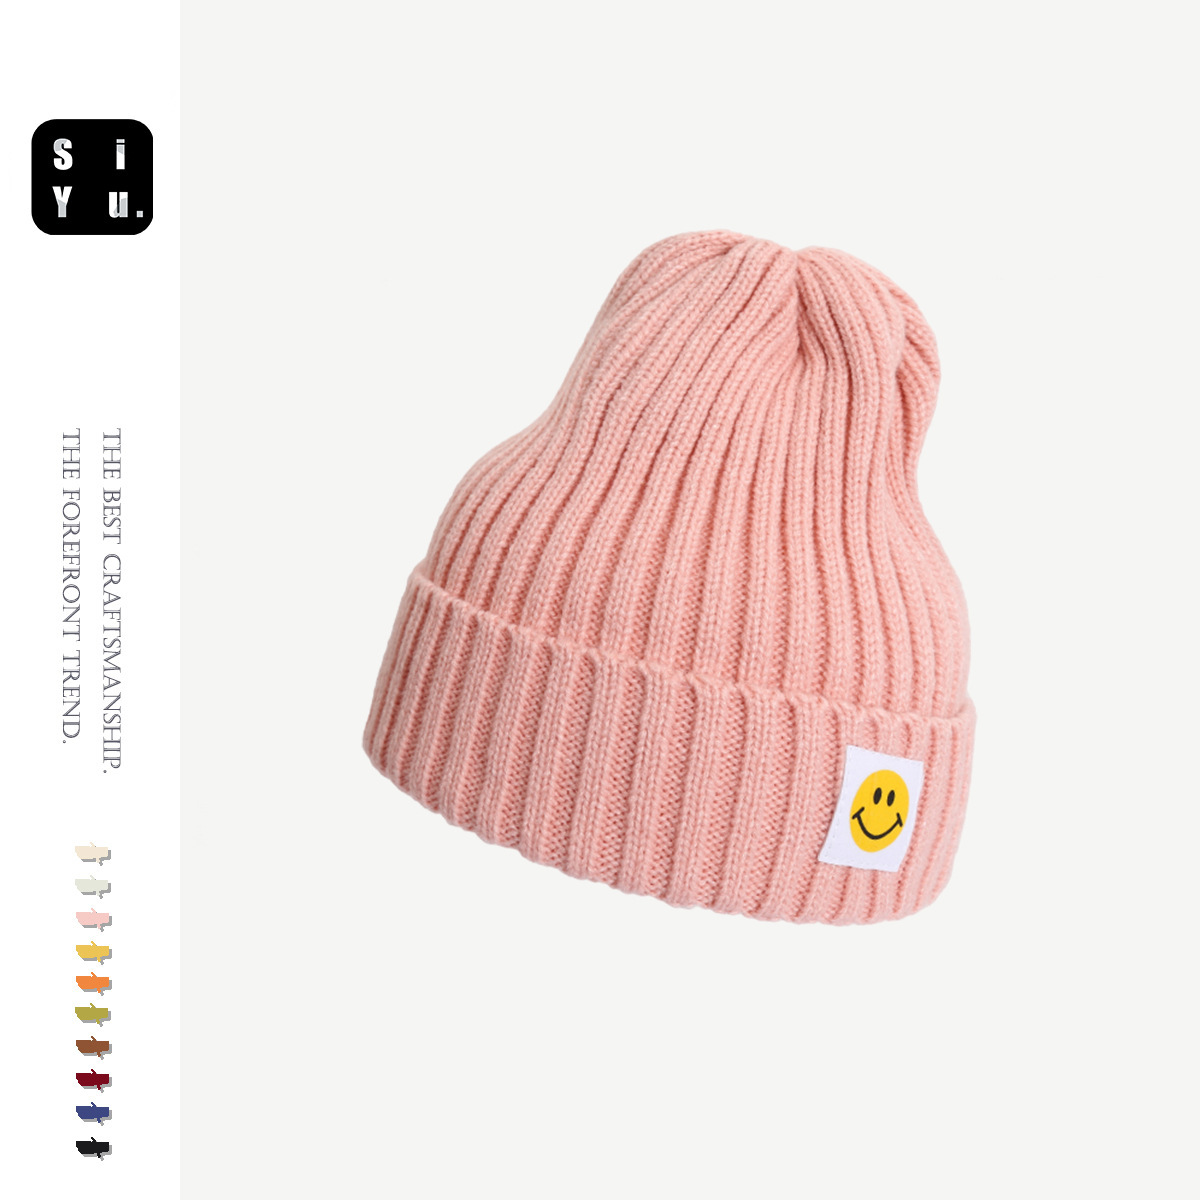 Instagram Mesh Red Hat Women's Autumn and Winter Earflaps Woolen Hat Patch Smiley Face Japanese and Korean Style Trendy Casual All-Matching Knitted Hat